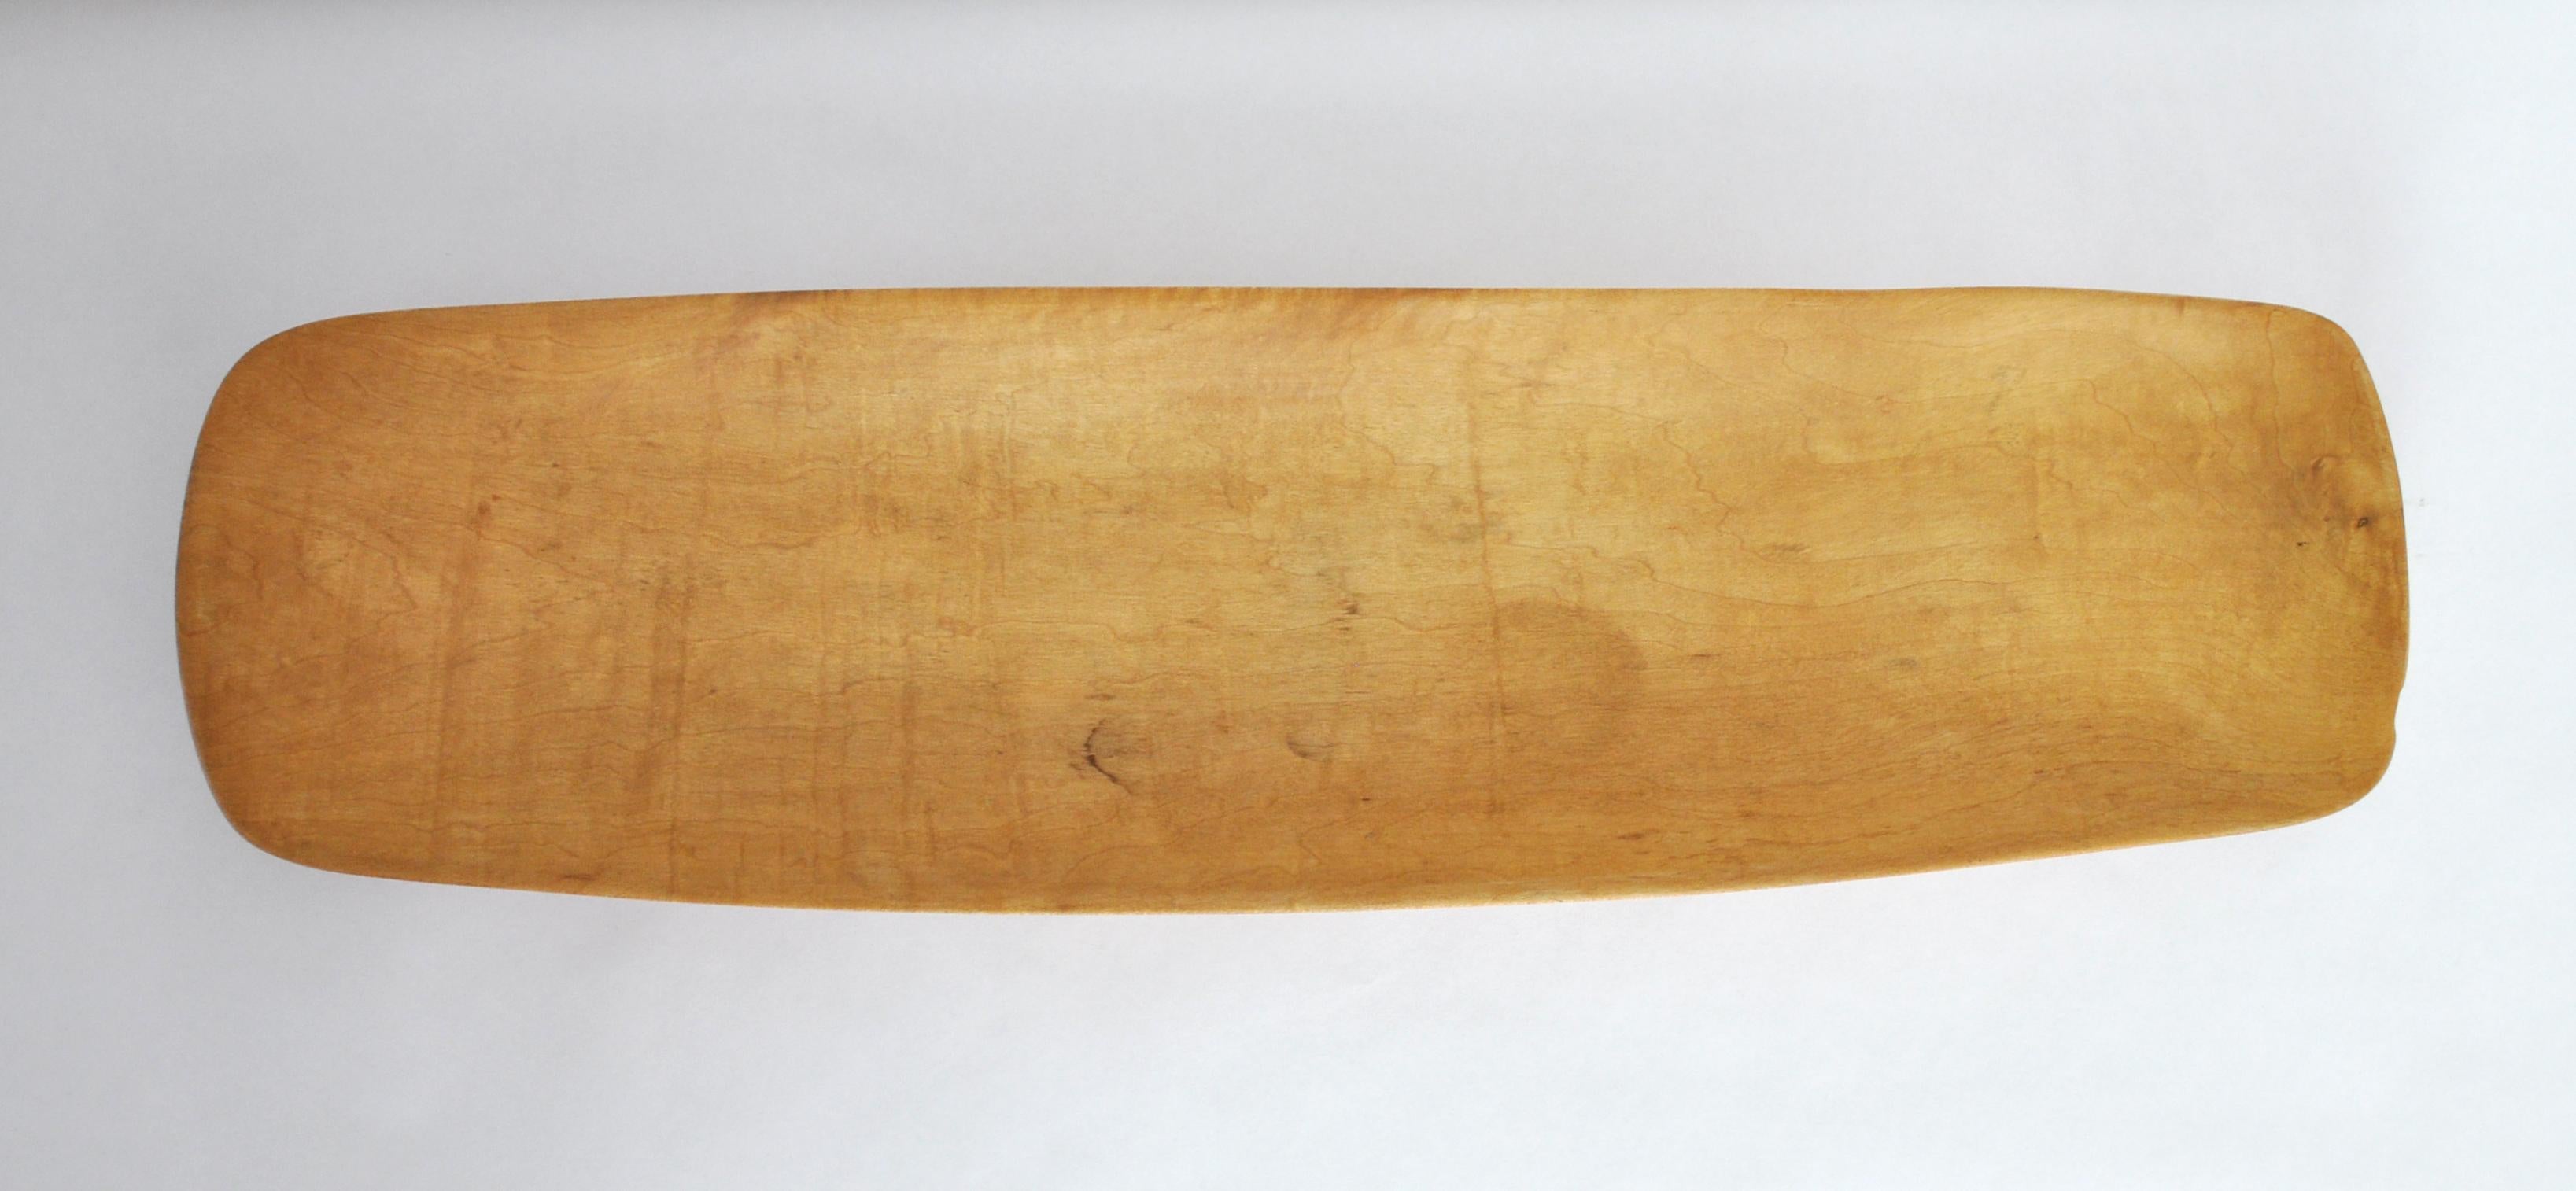 Handcrafted Danish Birch Dish with an Organic Design, 1960s For Sale 7